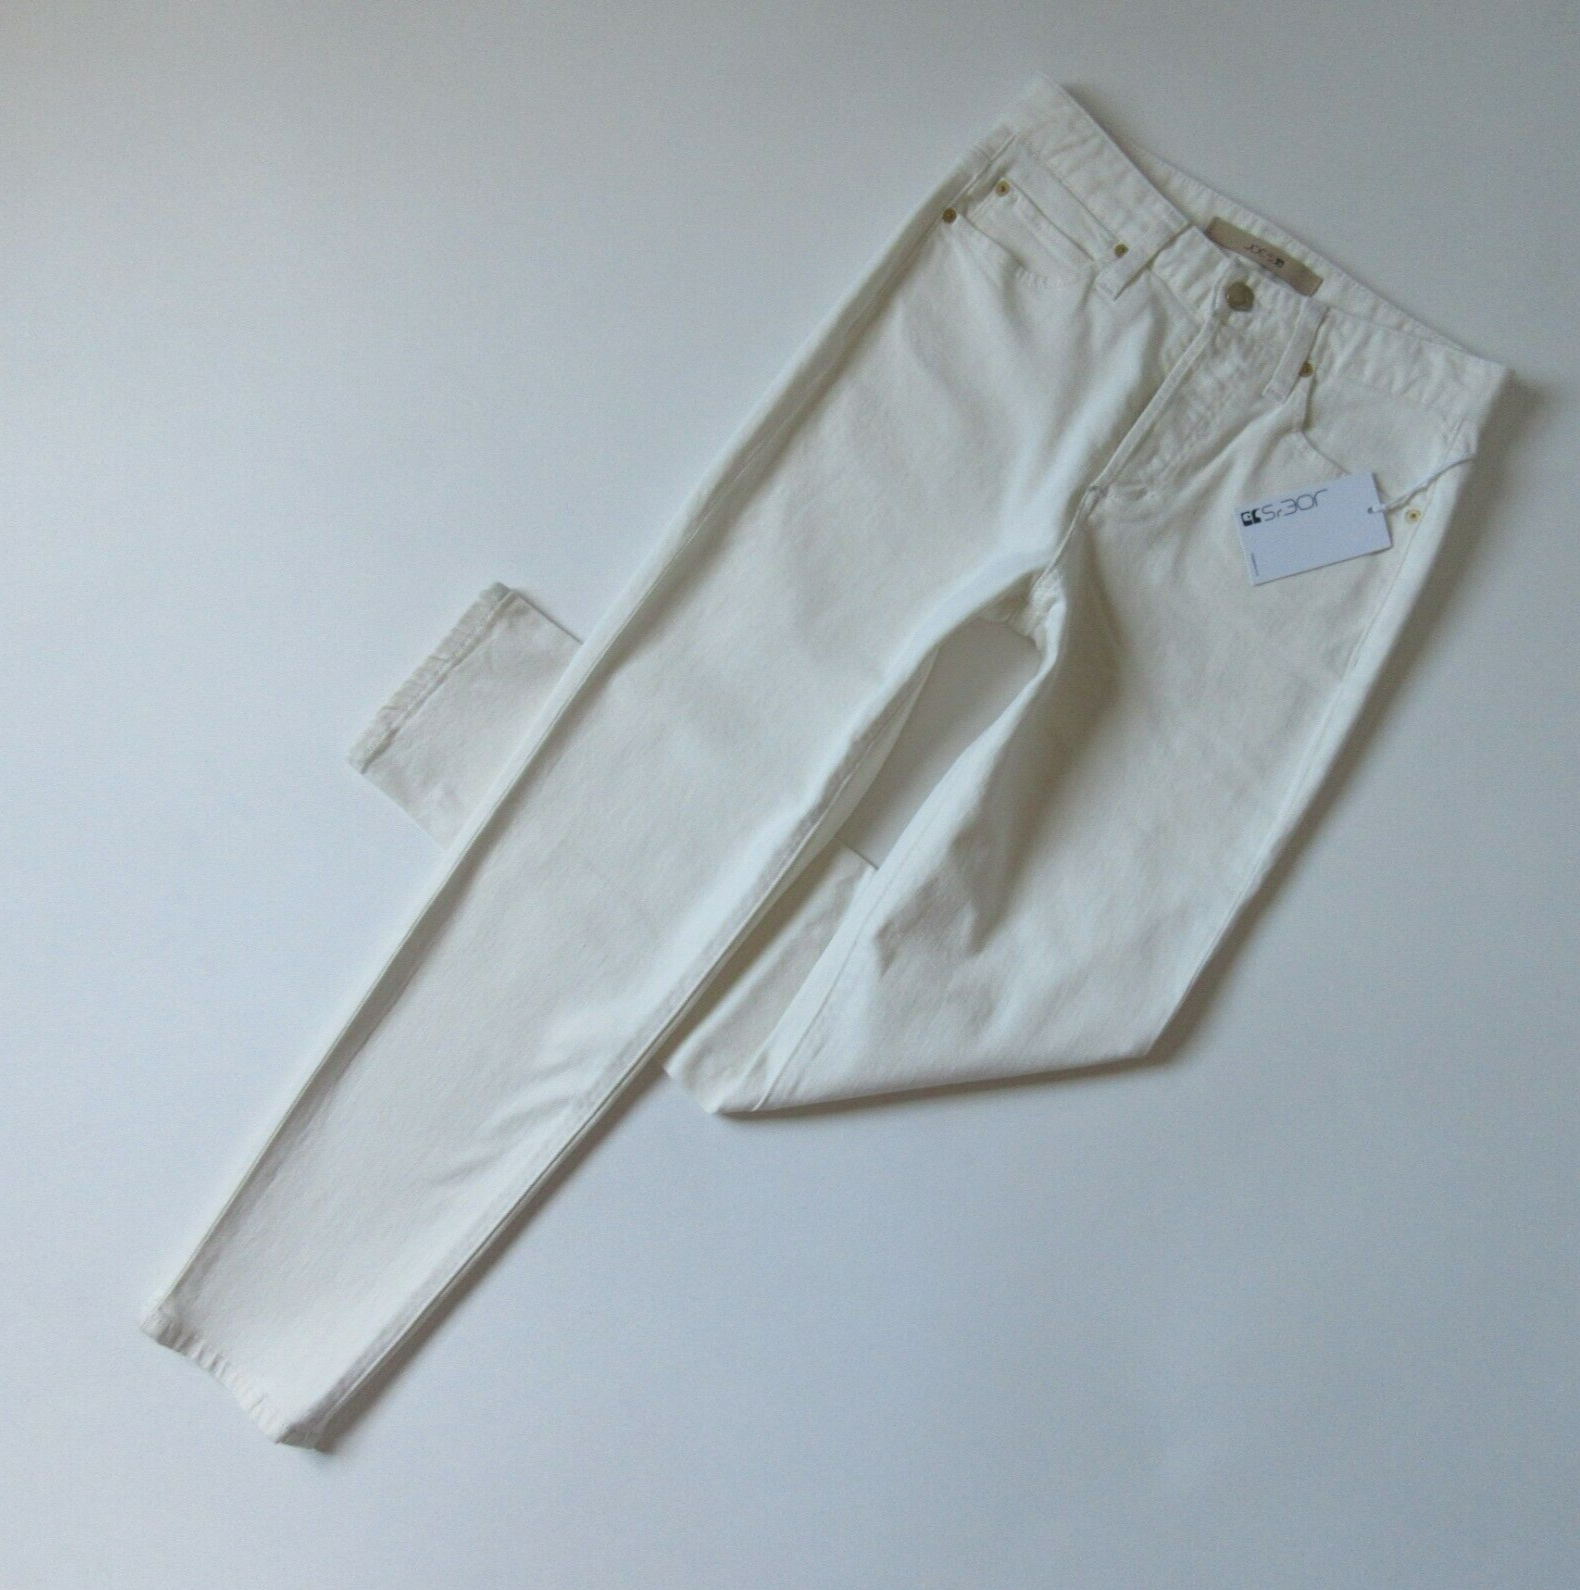 Primary image for NWT Joe's Jeans Collector's Edition The Smith in Layton Straight Crop Jeans 29